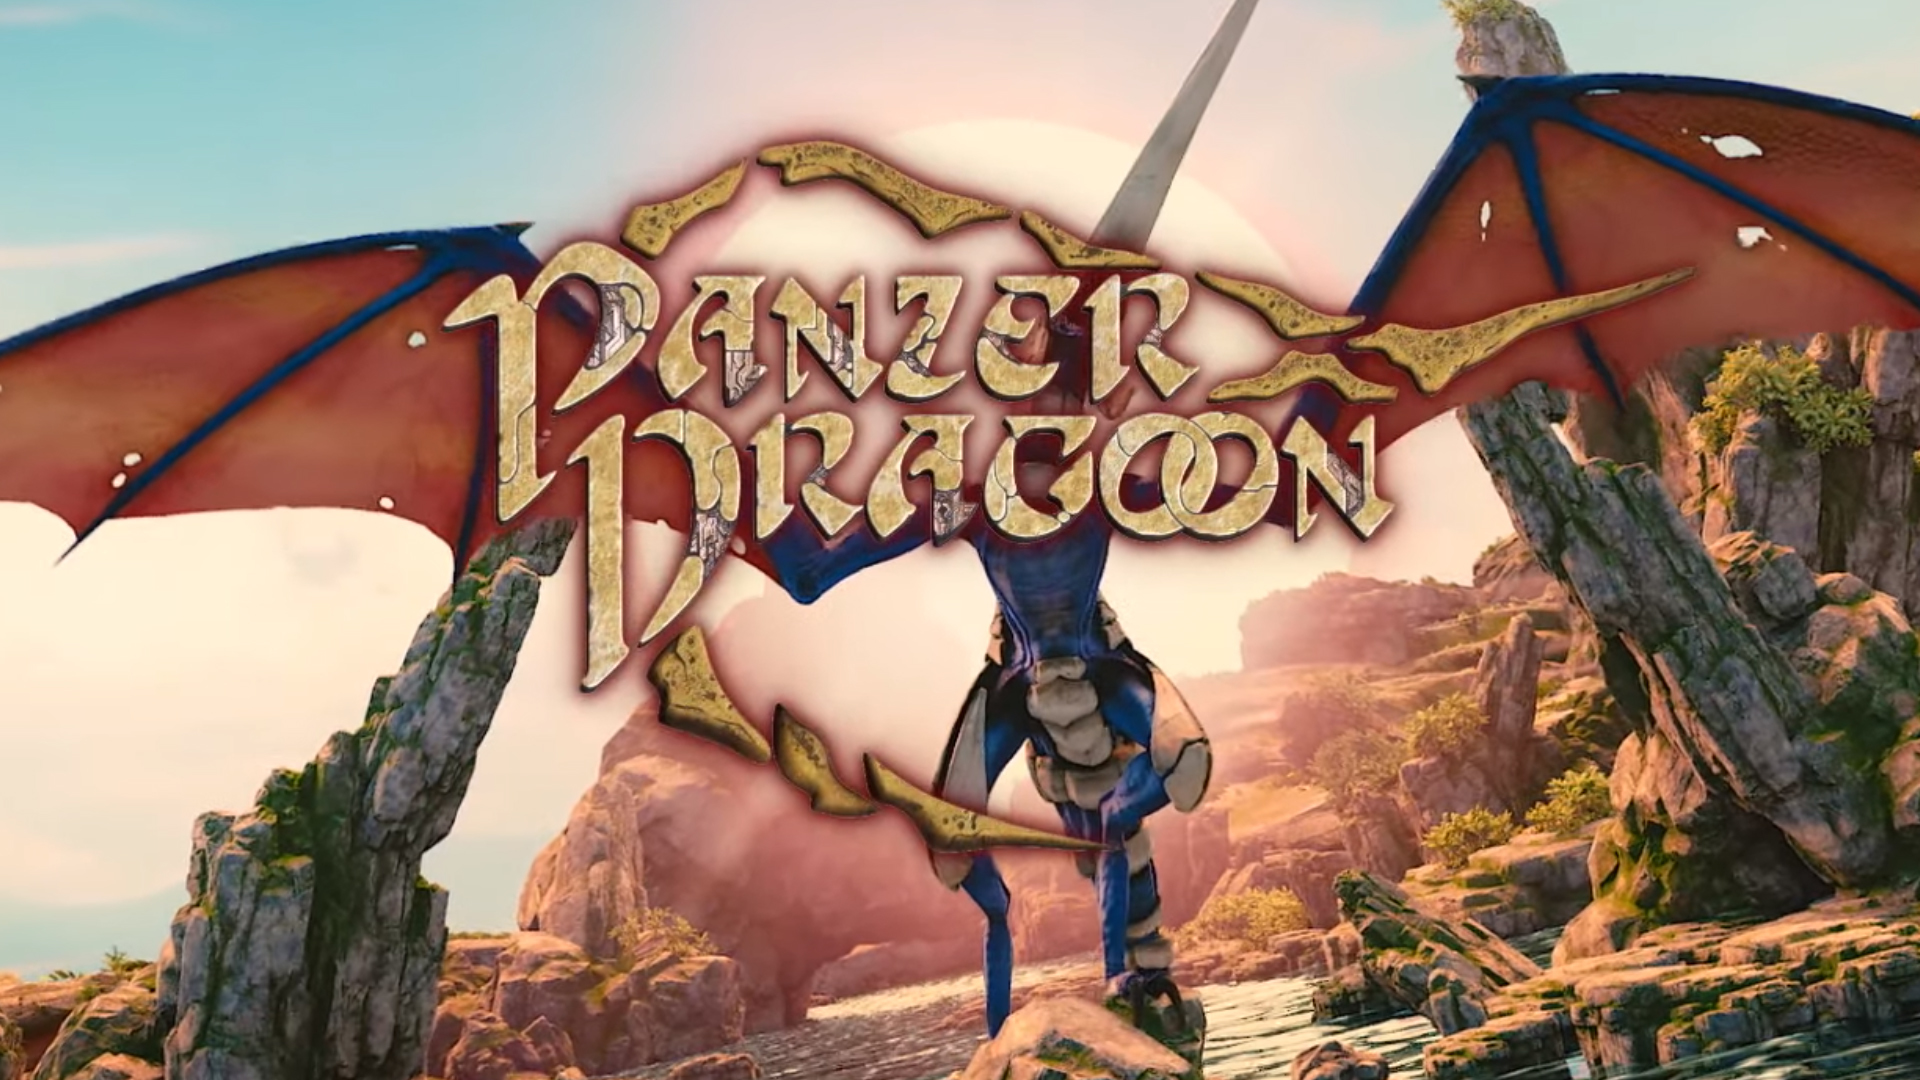 download panzer dragoon switch metacritic